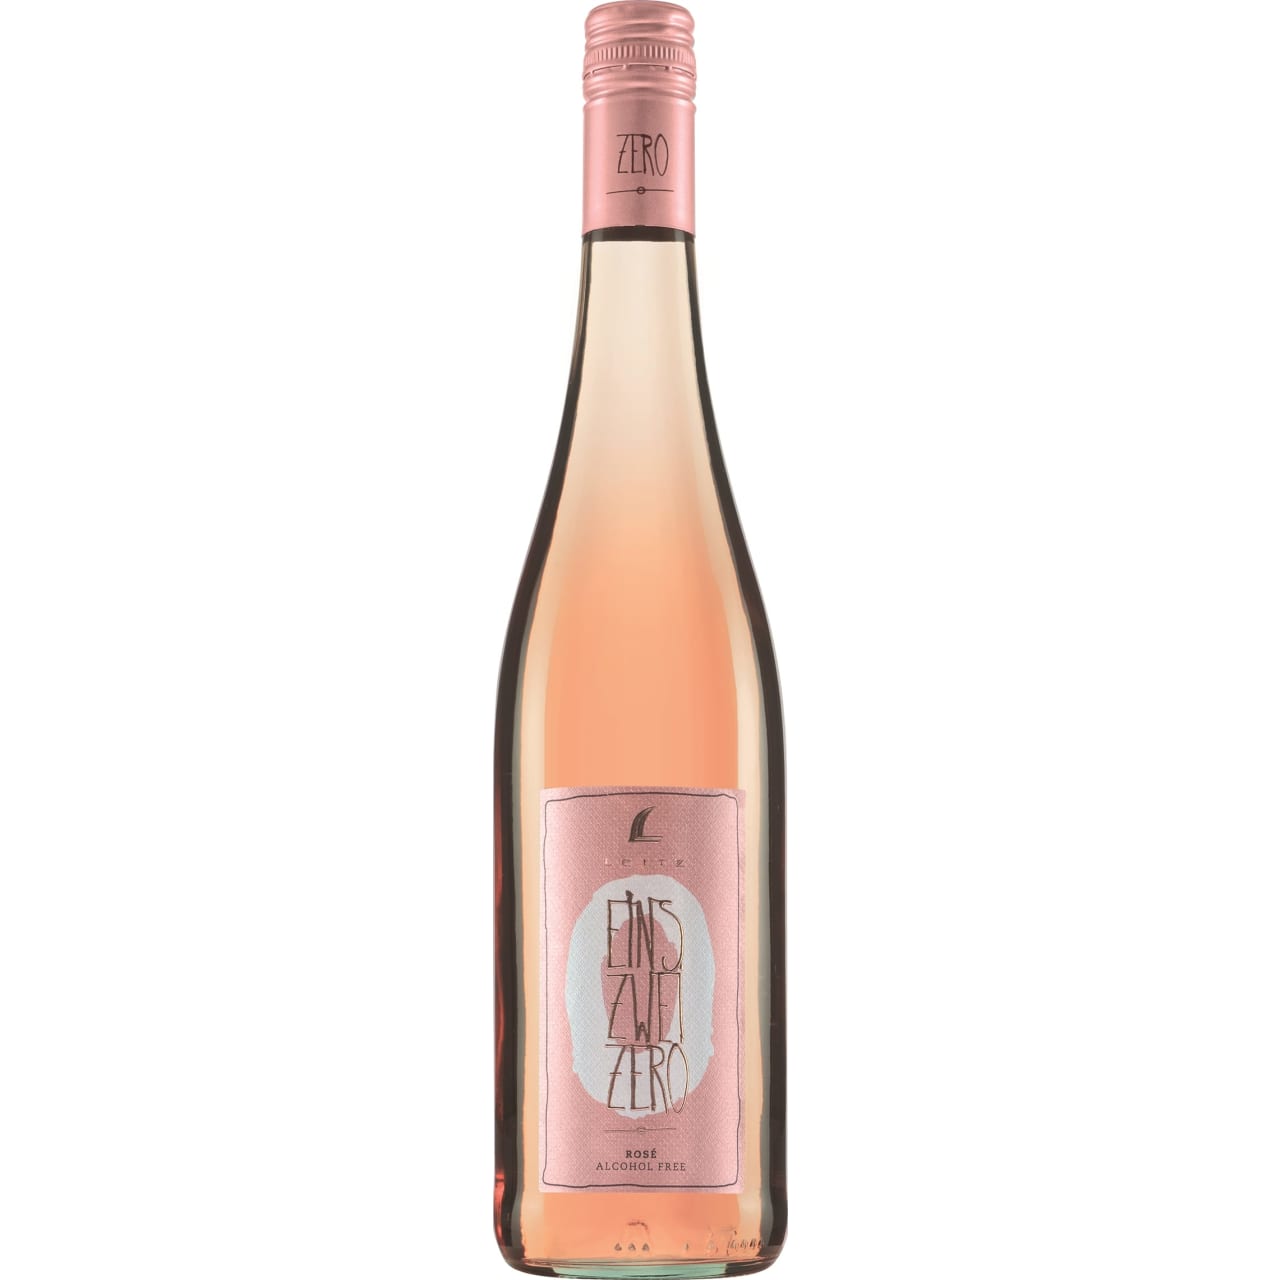 Clean, fresh, alcohol-free rosé, with flavours of strawberries, raspberries and grapefruit.